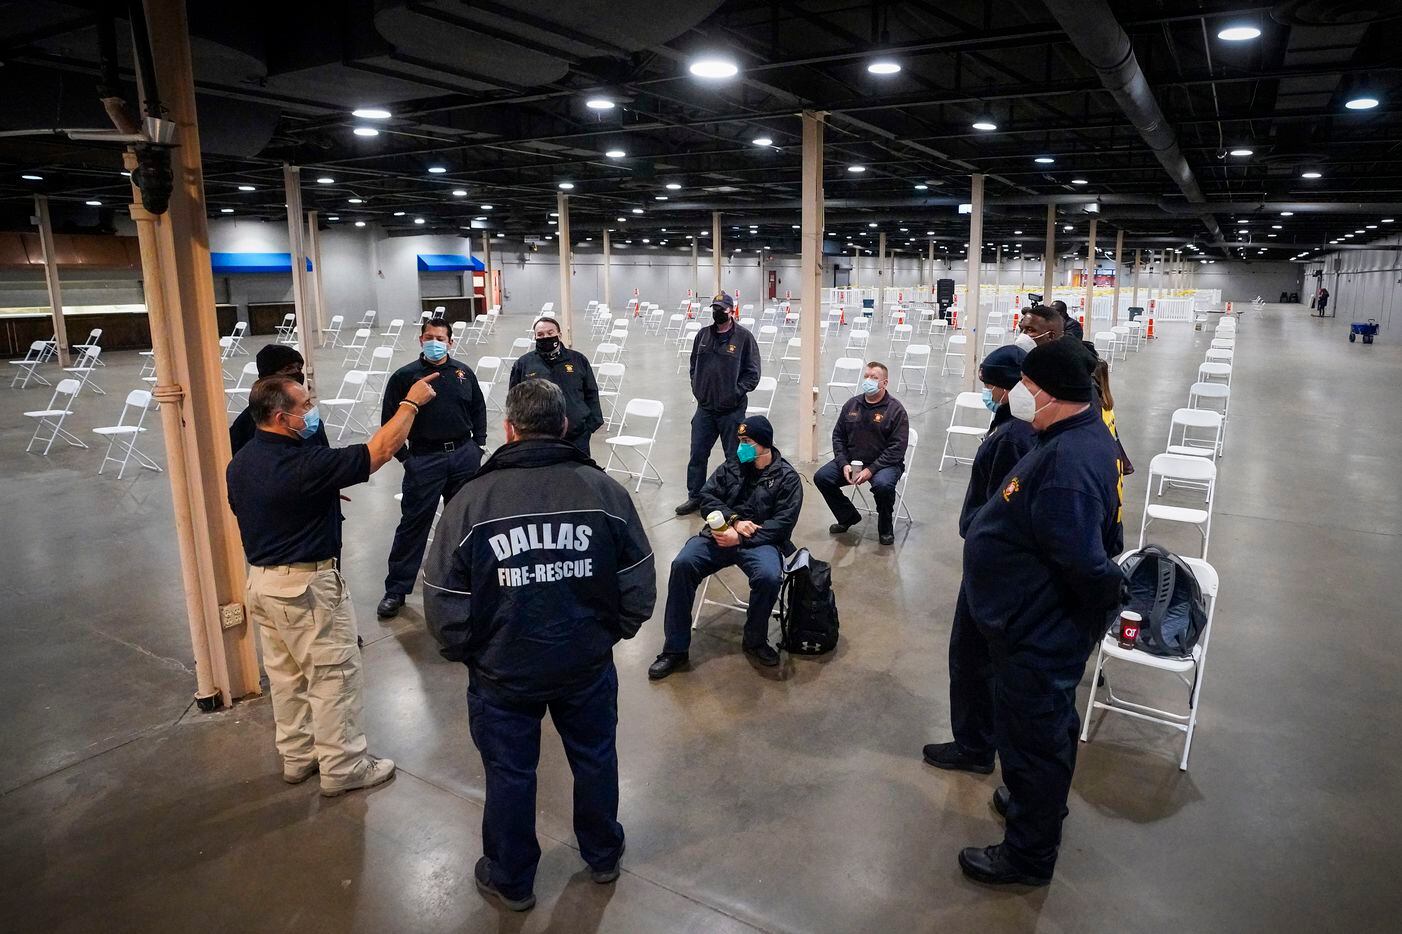 Richard Esparza of Dallas County Health and Human Services briefs Dallas Fire Rescue personnel before the doors to open for people to receive the COVID-19 vaccine at Fair Park on Monday, Jan. 11, 2021, in Dallas. Dallas County launched its first “mega” public COVID-19 vaccination site Monday at Fair Park.